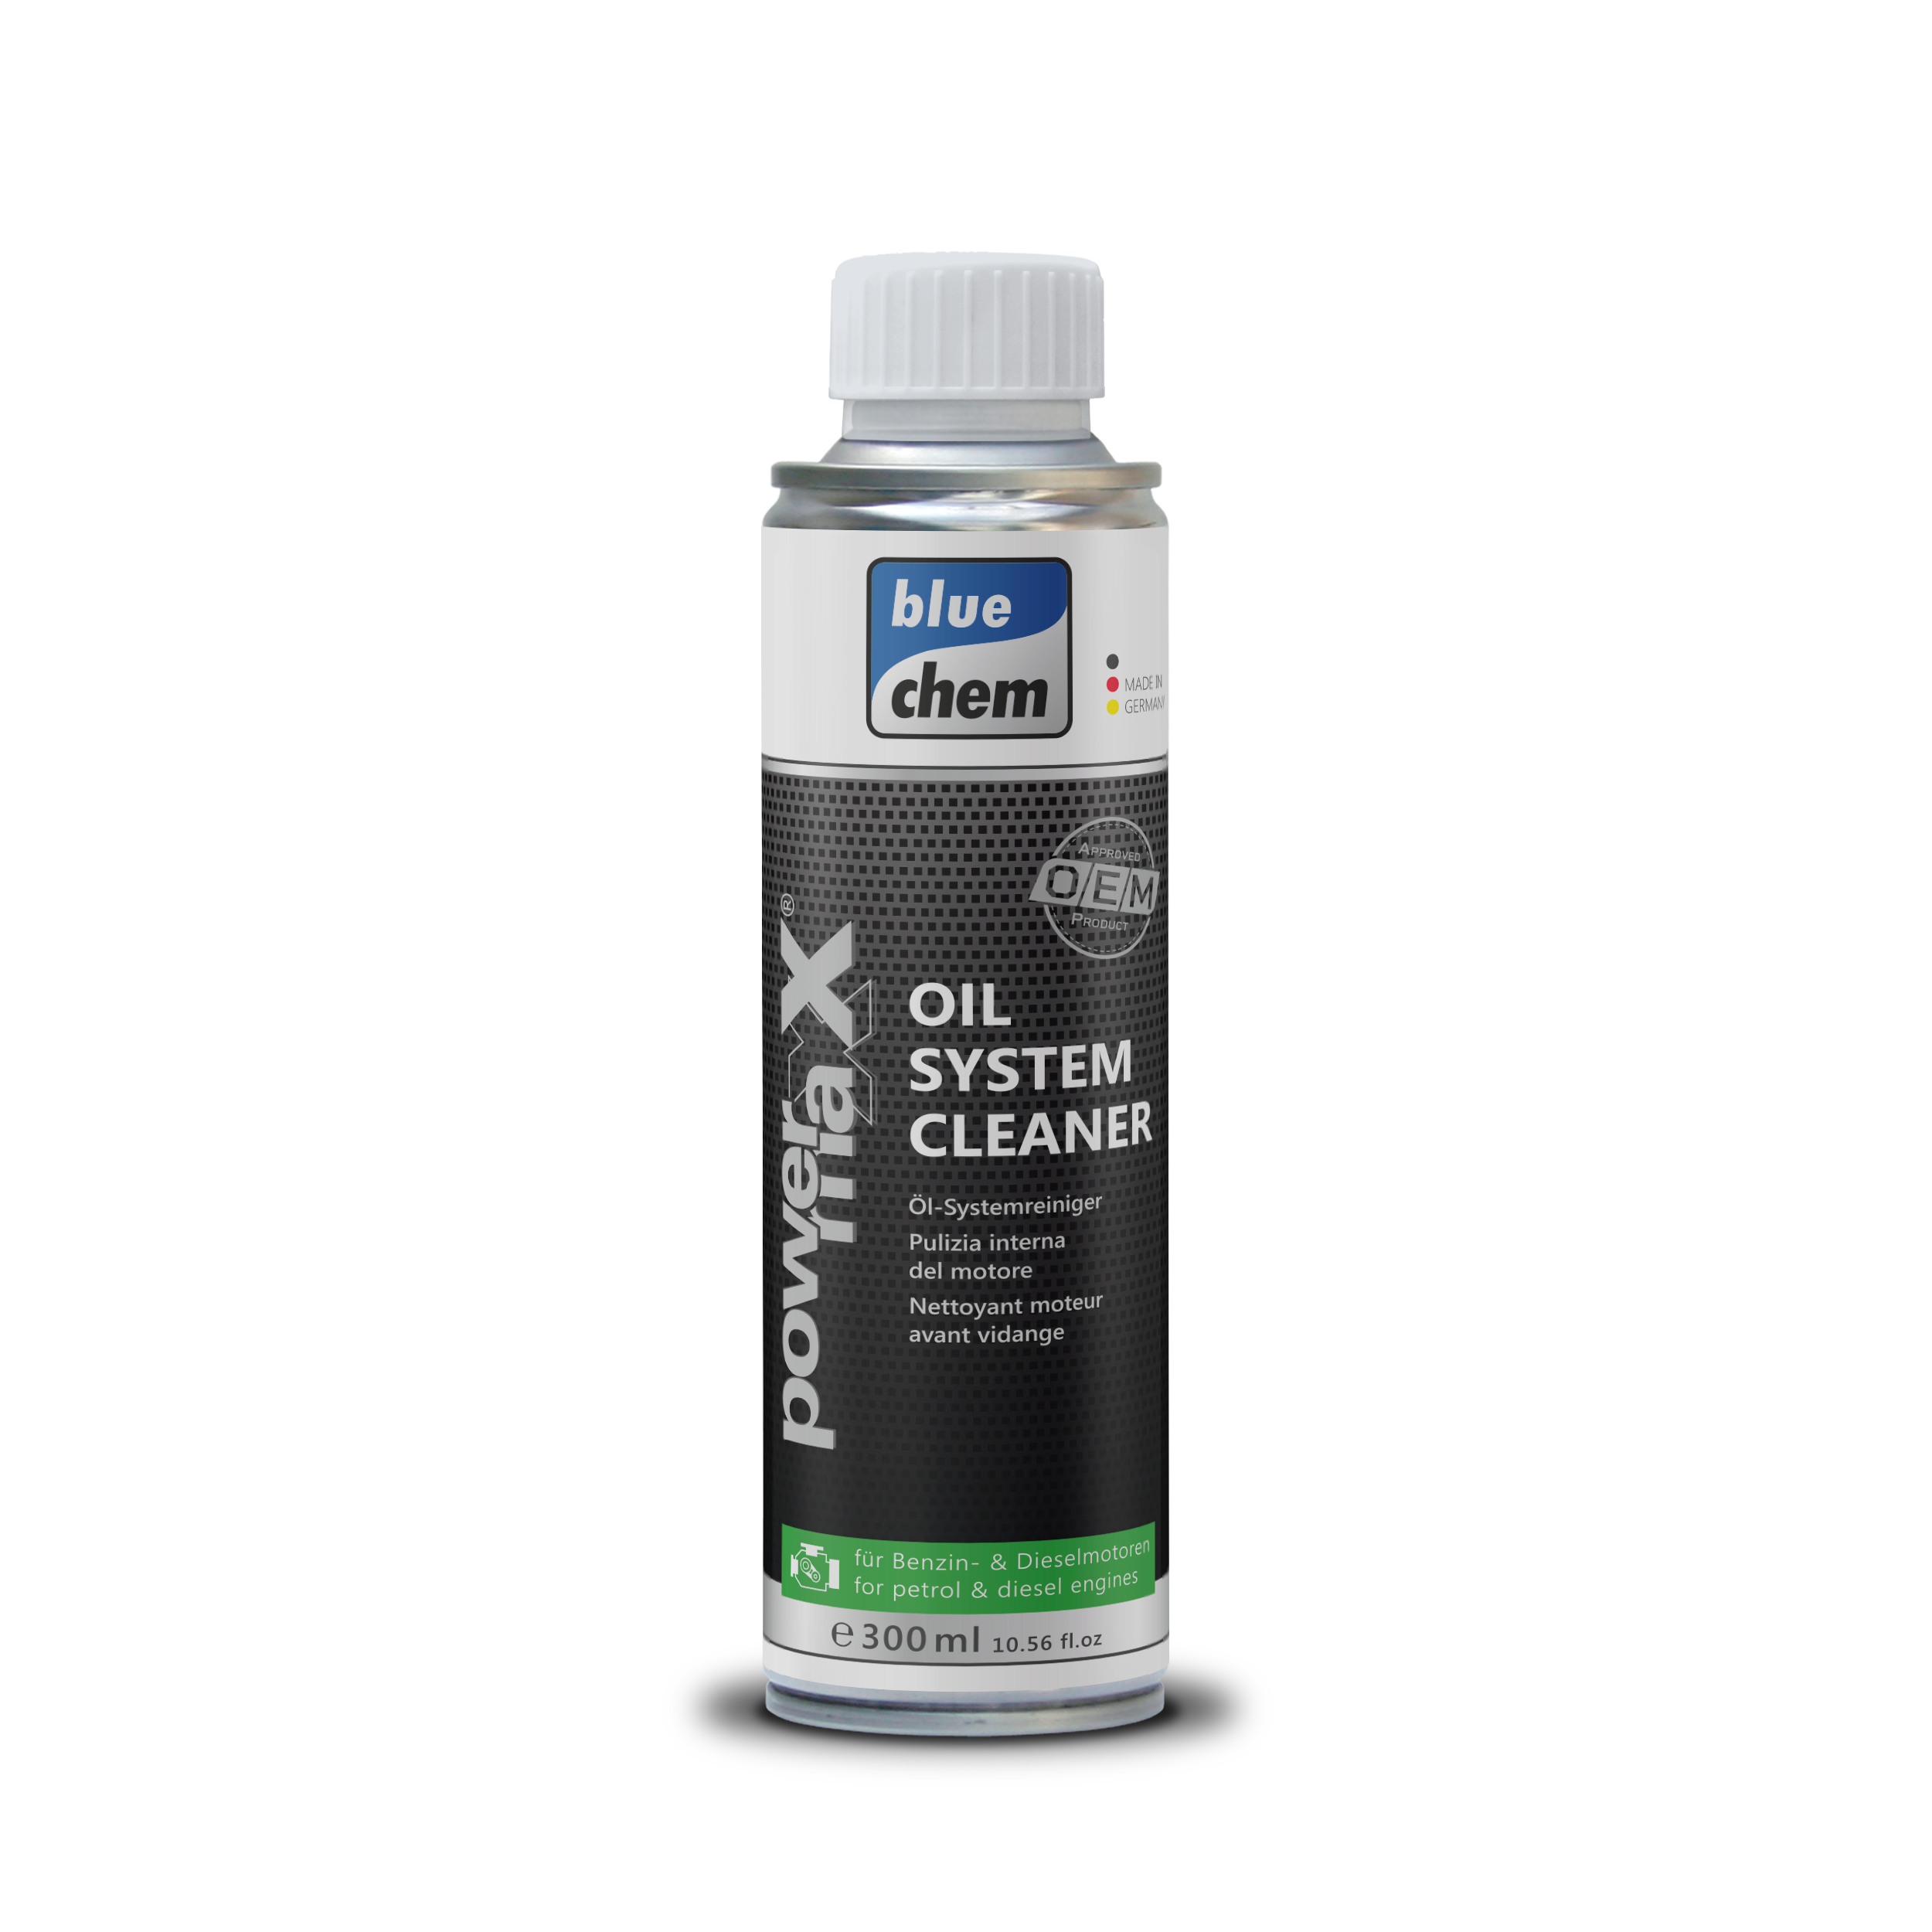 Oil System Cleaner